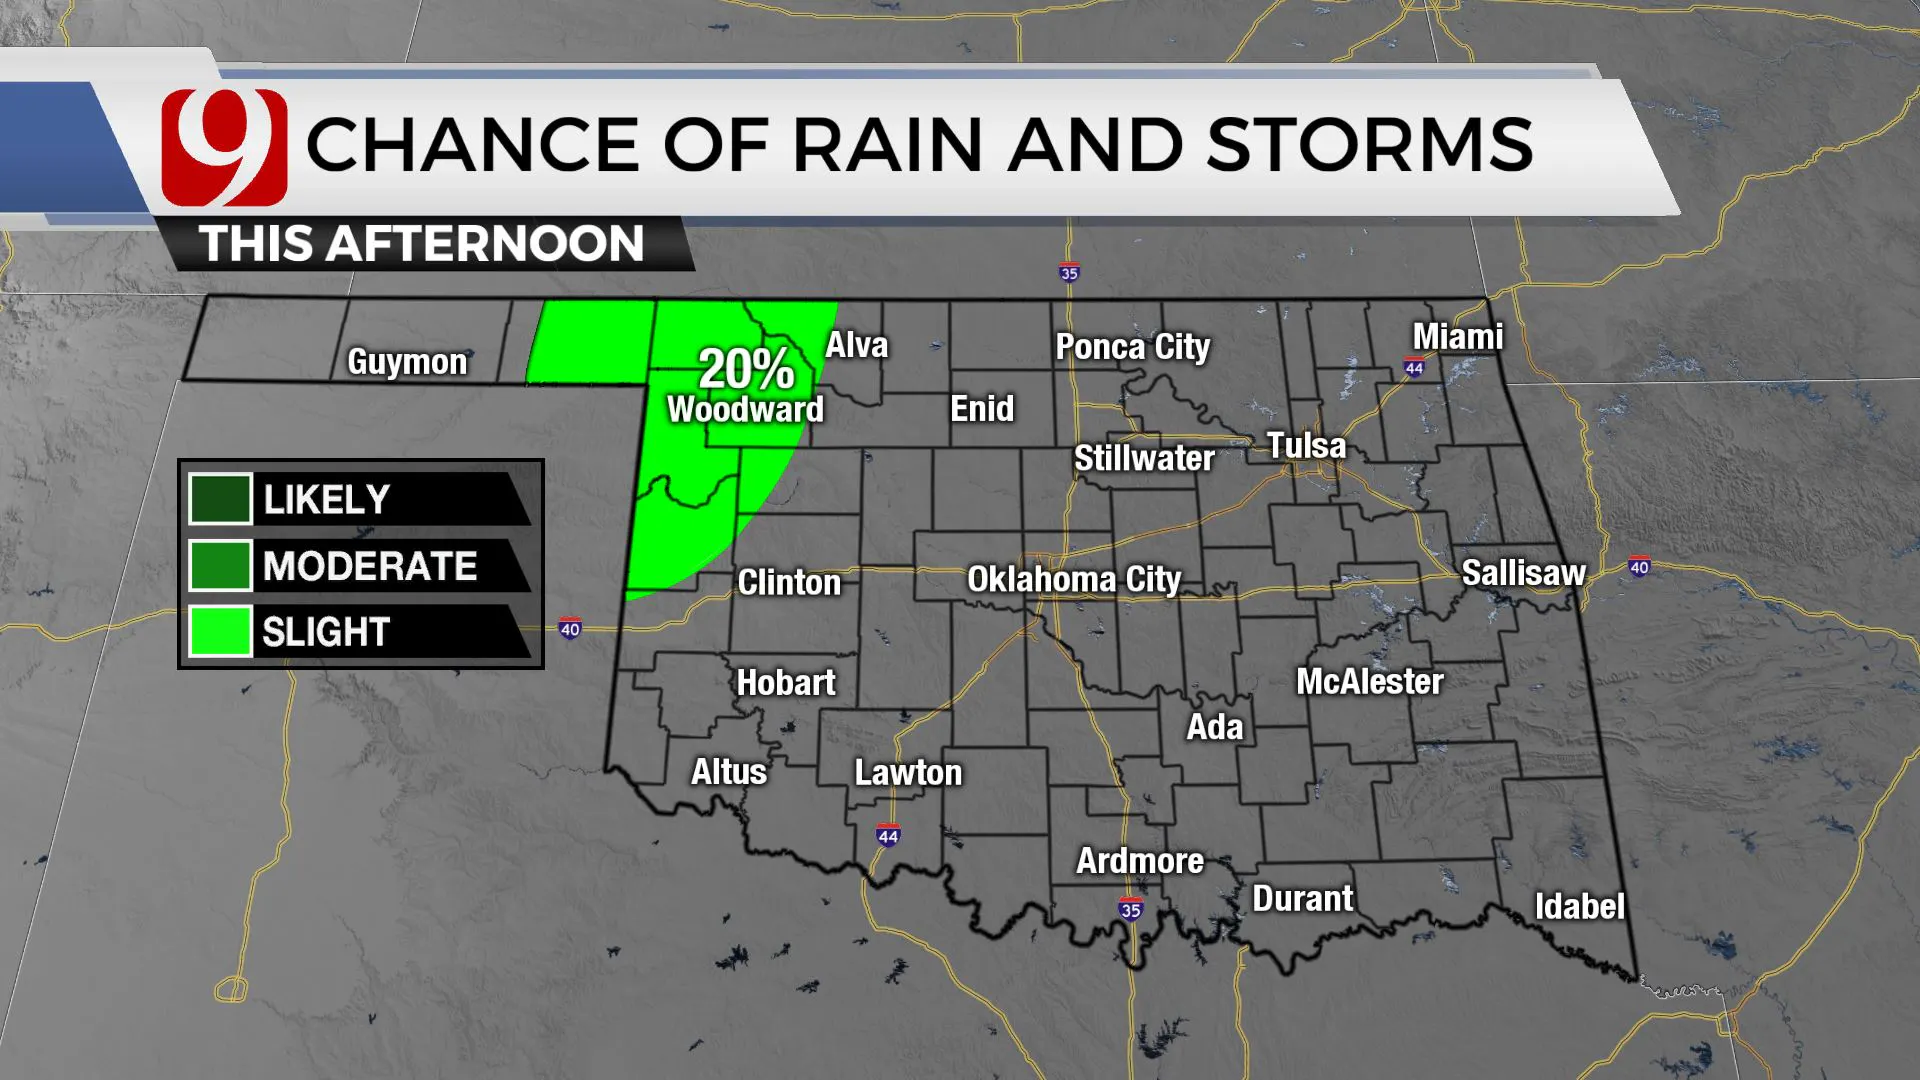 Chances of rain and storms this afternoon.